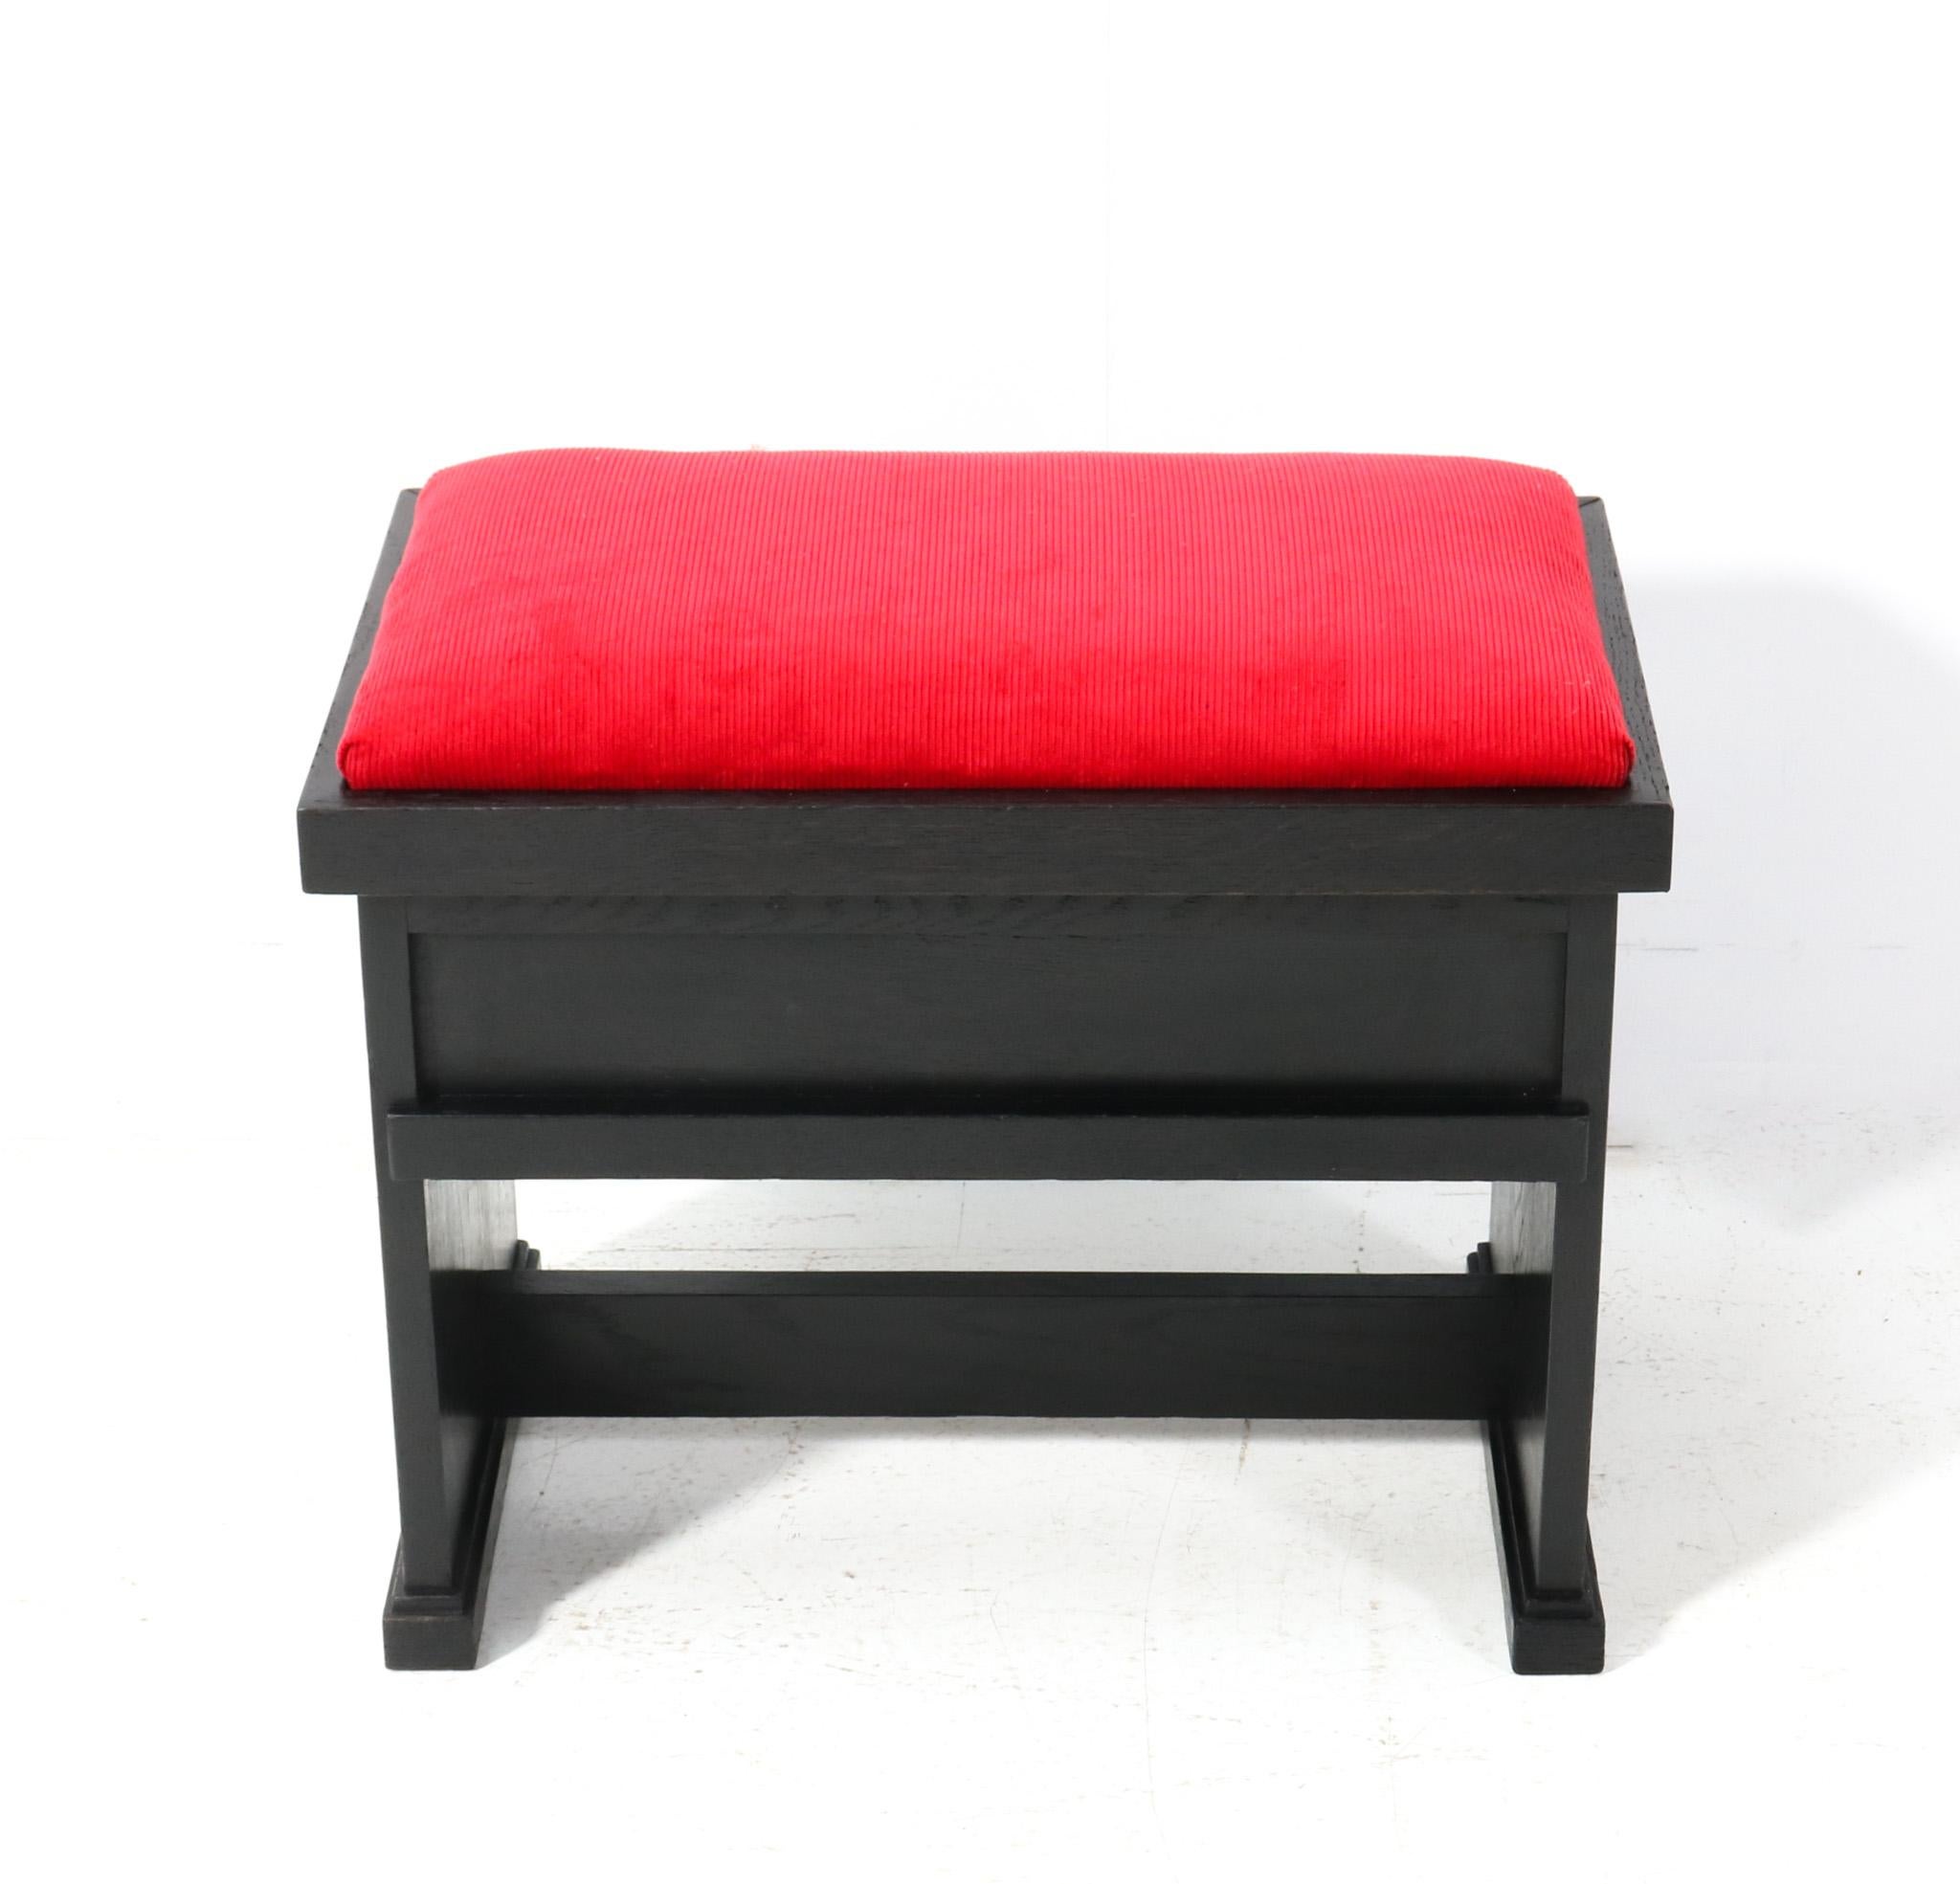 Magnificent and ultra rare Art Deco Modernist stool.
Design by Hendrik Wouda for H. Pander & Zonen Den Haag.
Striking Dutch design from the 1920s.
Original black lacquered oak frame with re-upholstered seat in red Manchester corduroy fabric.
You can